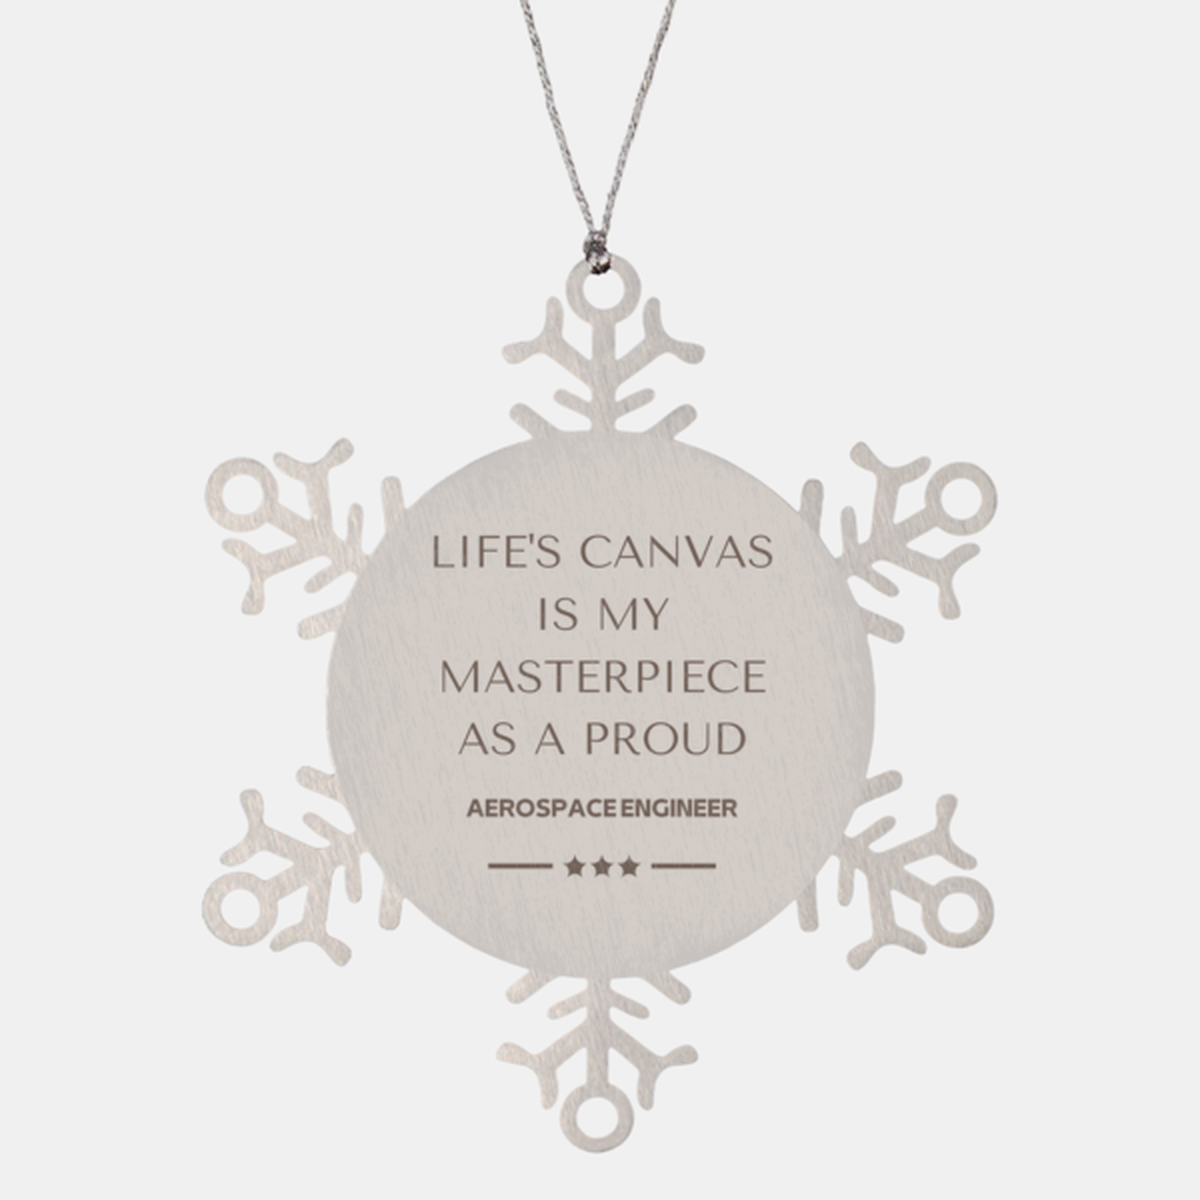 Proud Aerospace Engineer Gifts, Life's canvas is my masterpiece, Epic Birthday Christmas Unique Snowflake Ornament For Aerospace Engineer, Coworkers, Men, Women, Friends